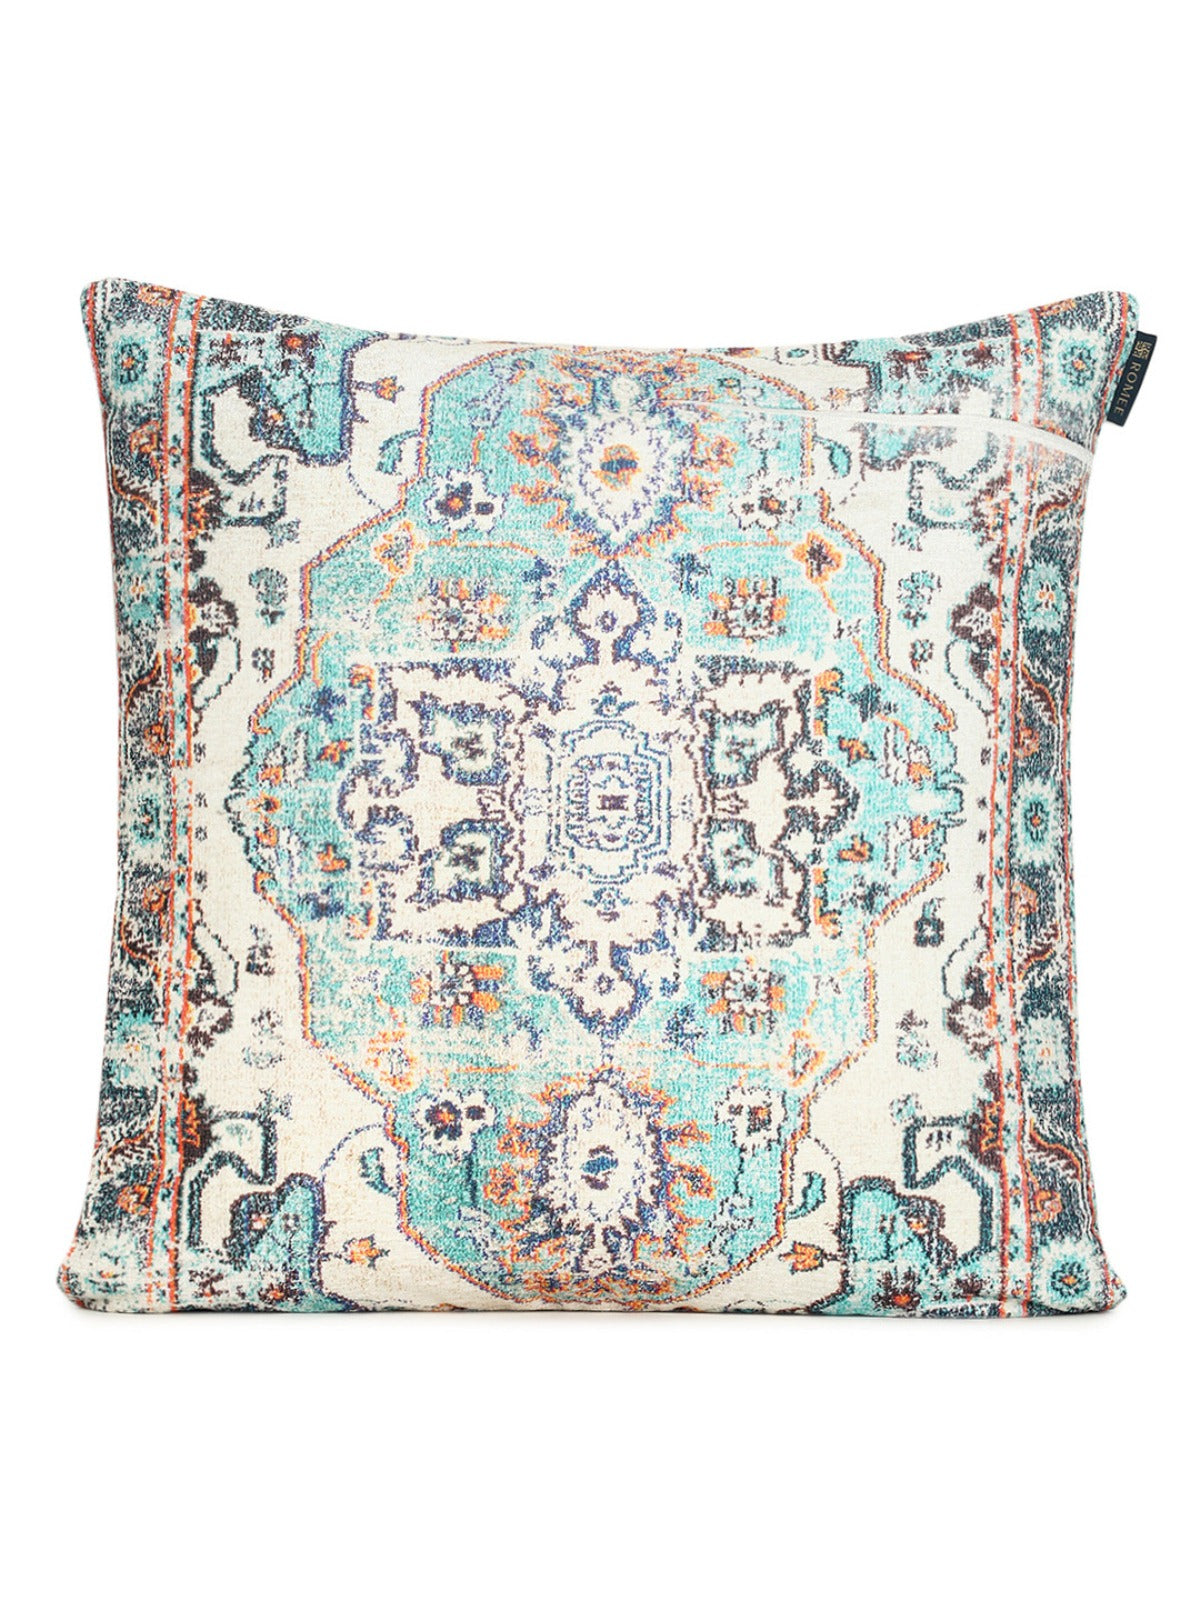 Beige and Turquoise Set of 2 Cushion Covers 24x24 Inch